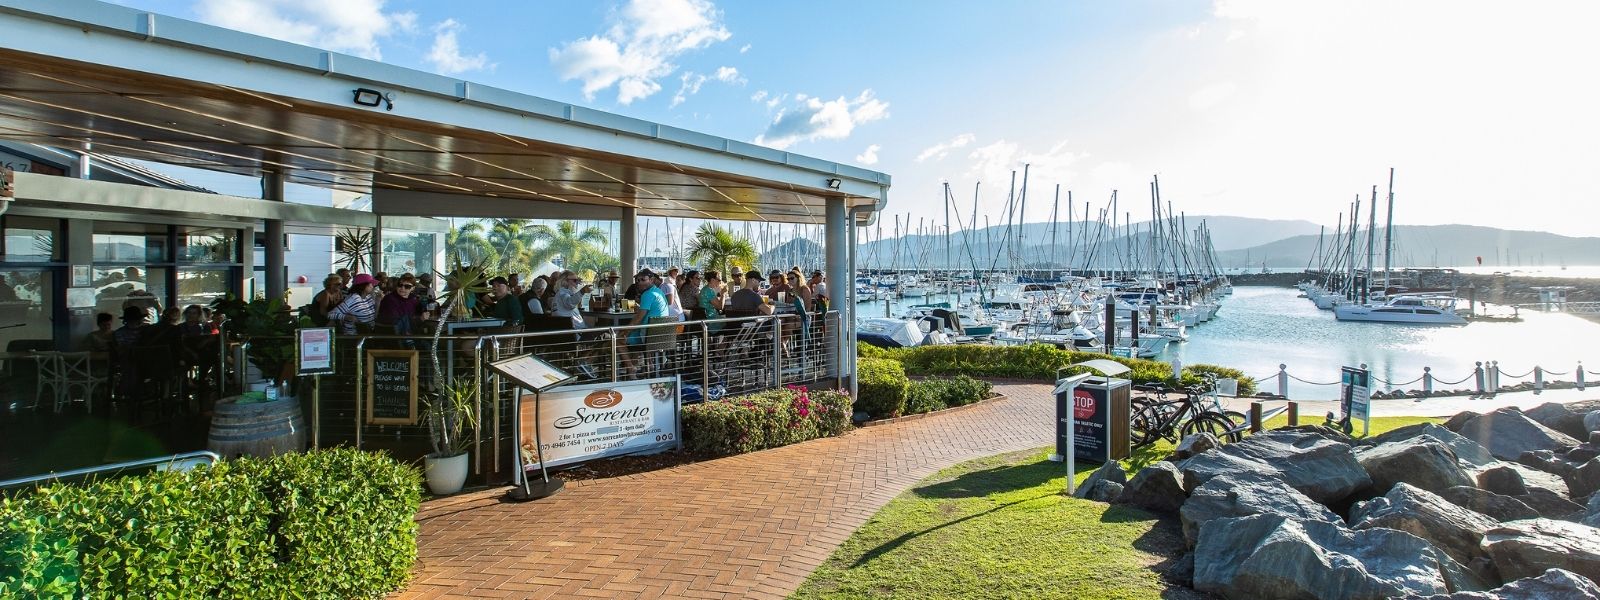 Wine and dine in the marina village